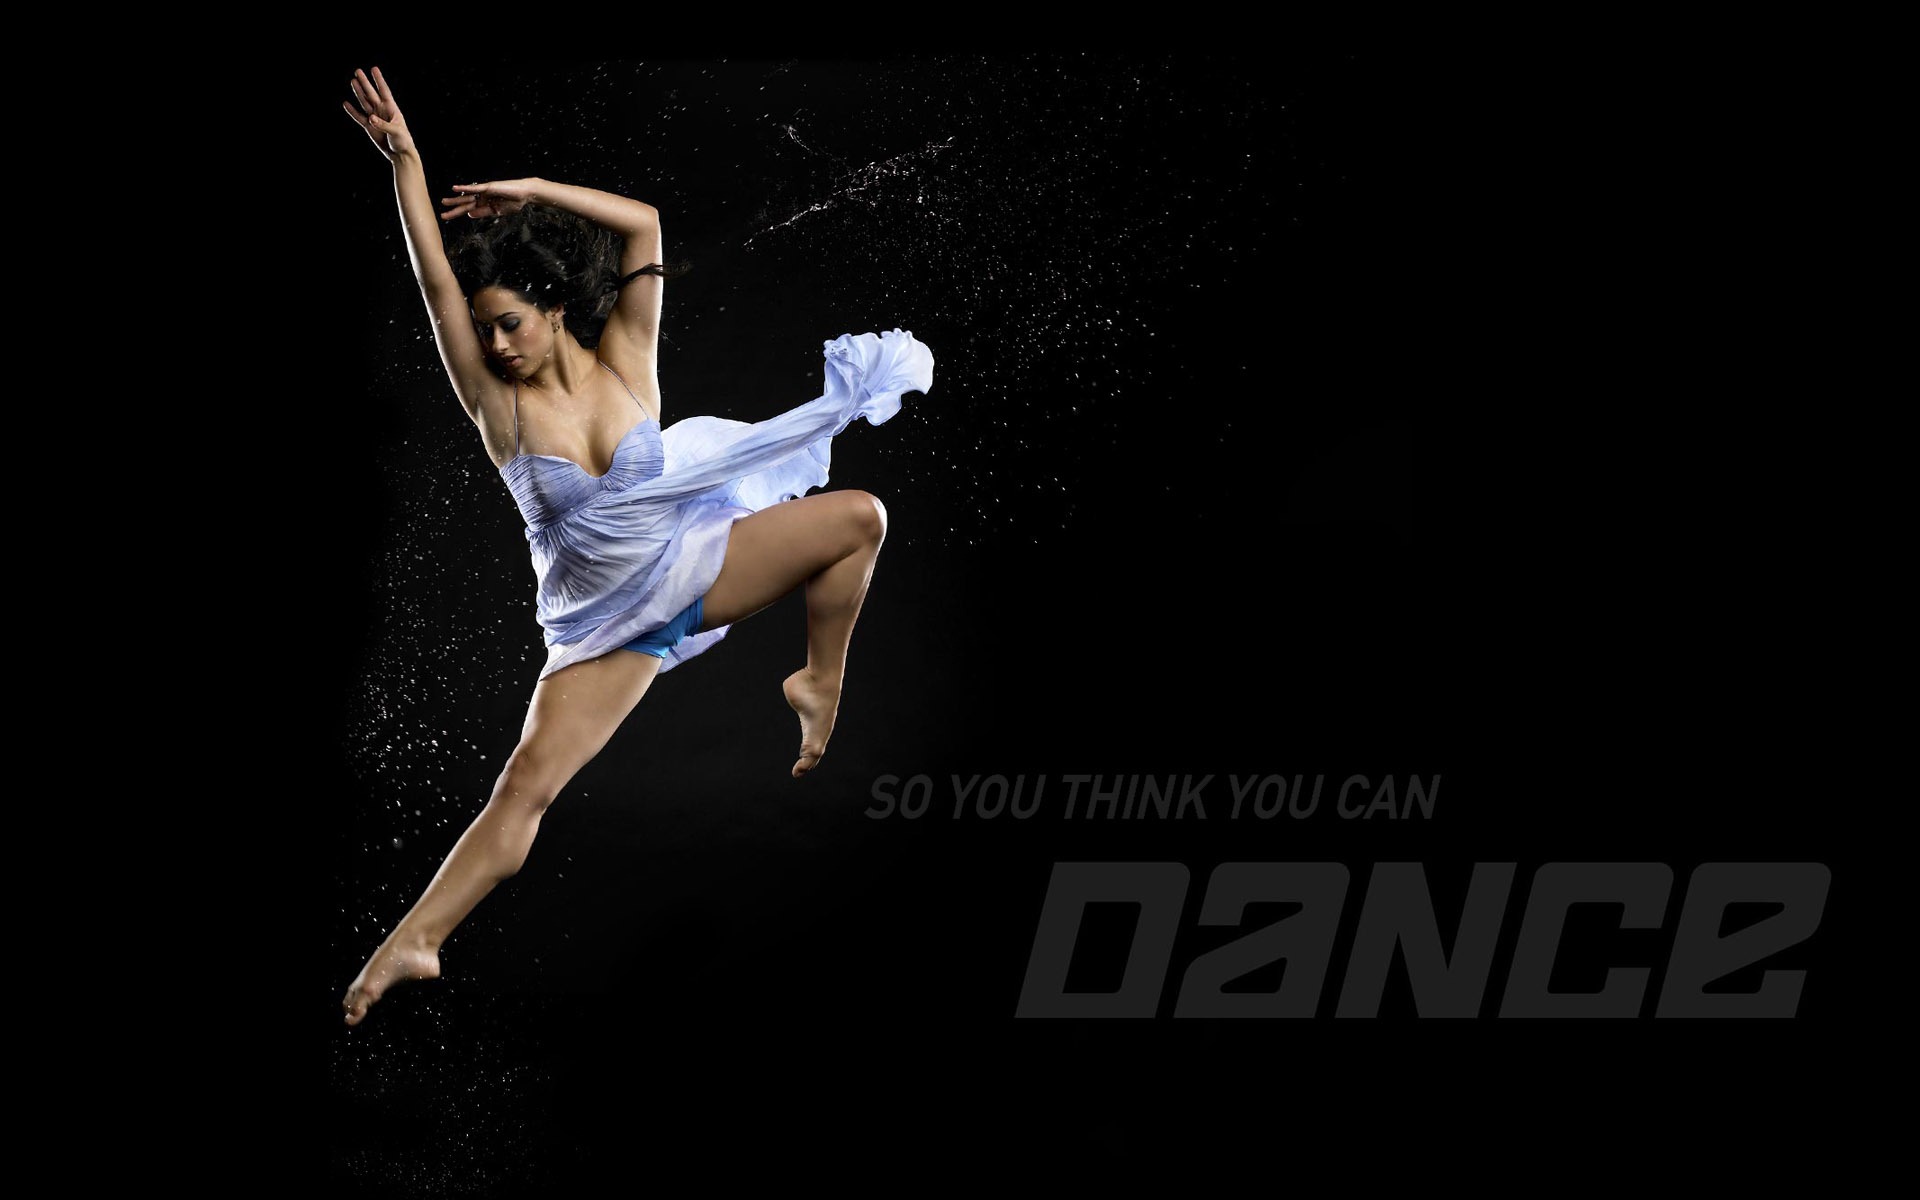 So You Think You Can Dance wallpaper (1) #3 - 1920x1200